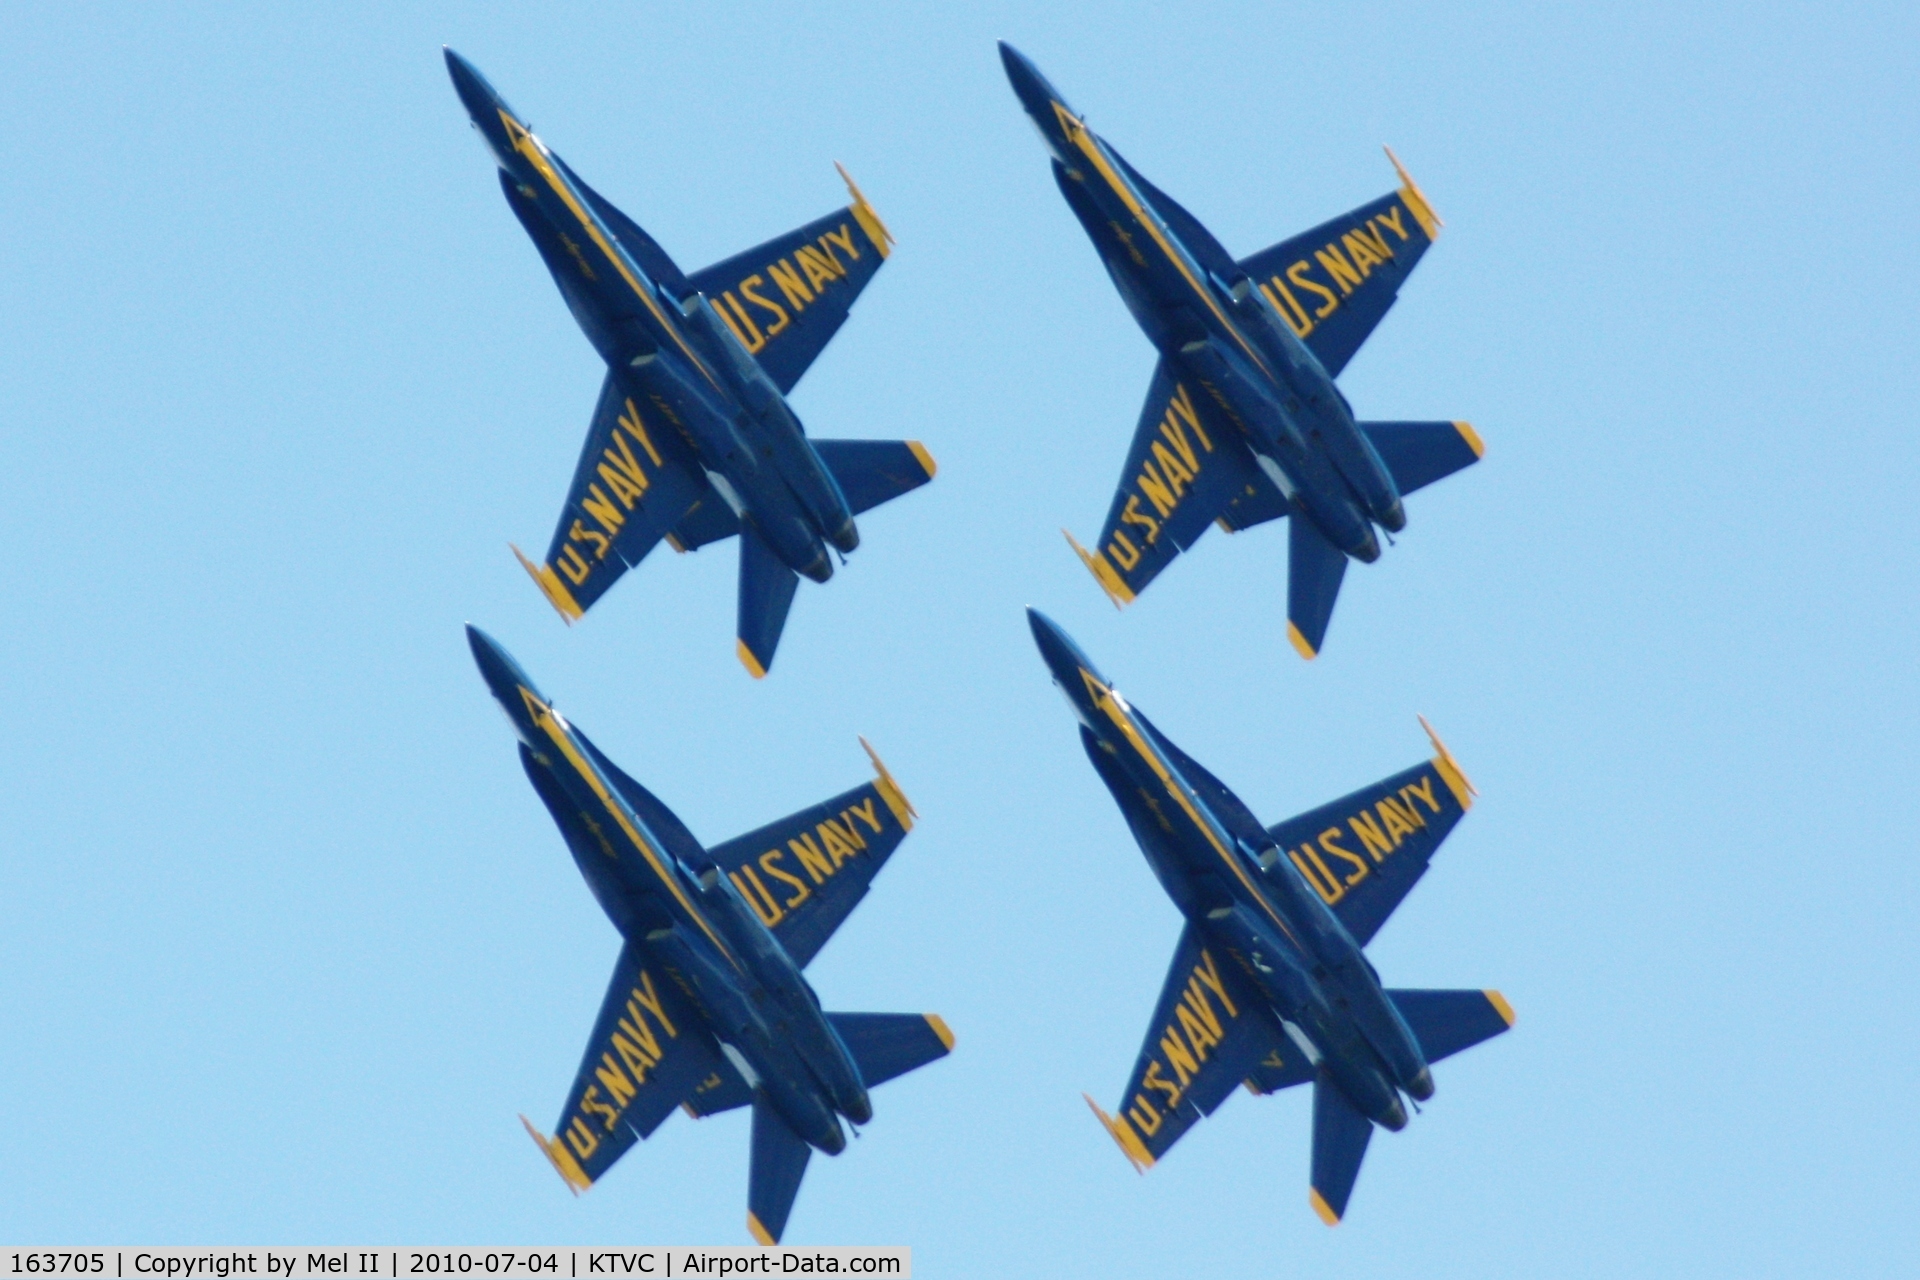 163705, 1988 McDonnell Douglas F/A-18C Hornet C/N 0767/C067, US Navy Blue Angels Diamond Formation at the 2010 National Cherry Festival Air Show